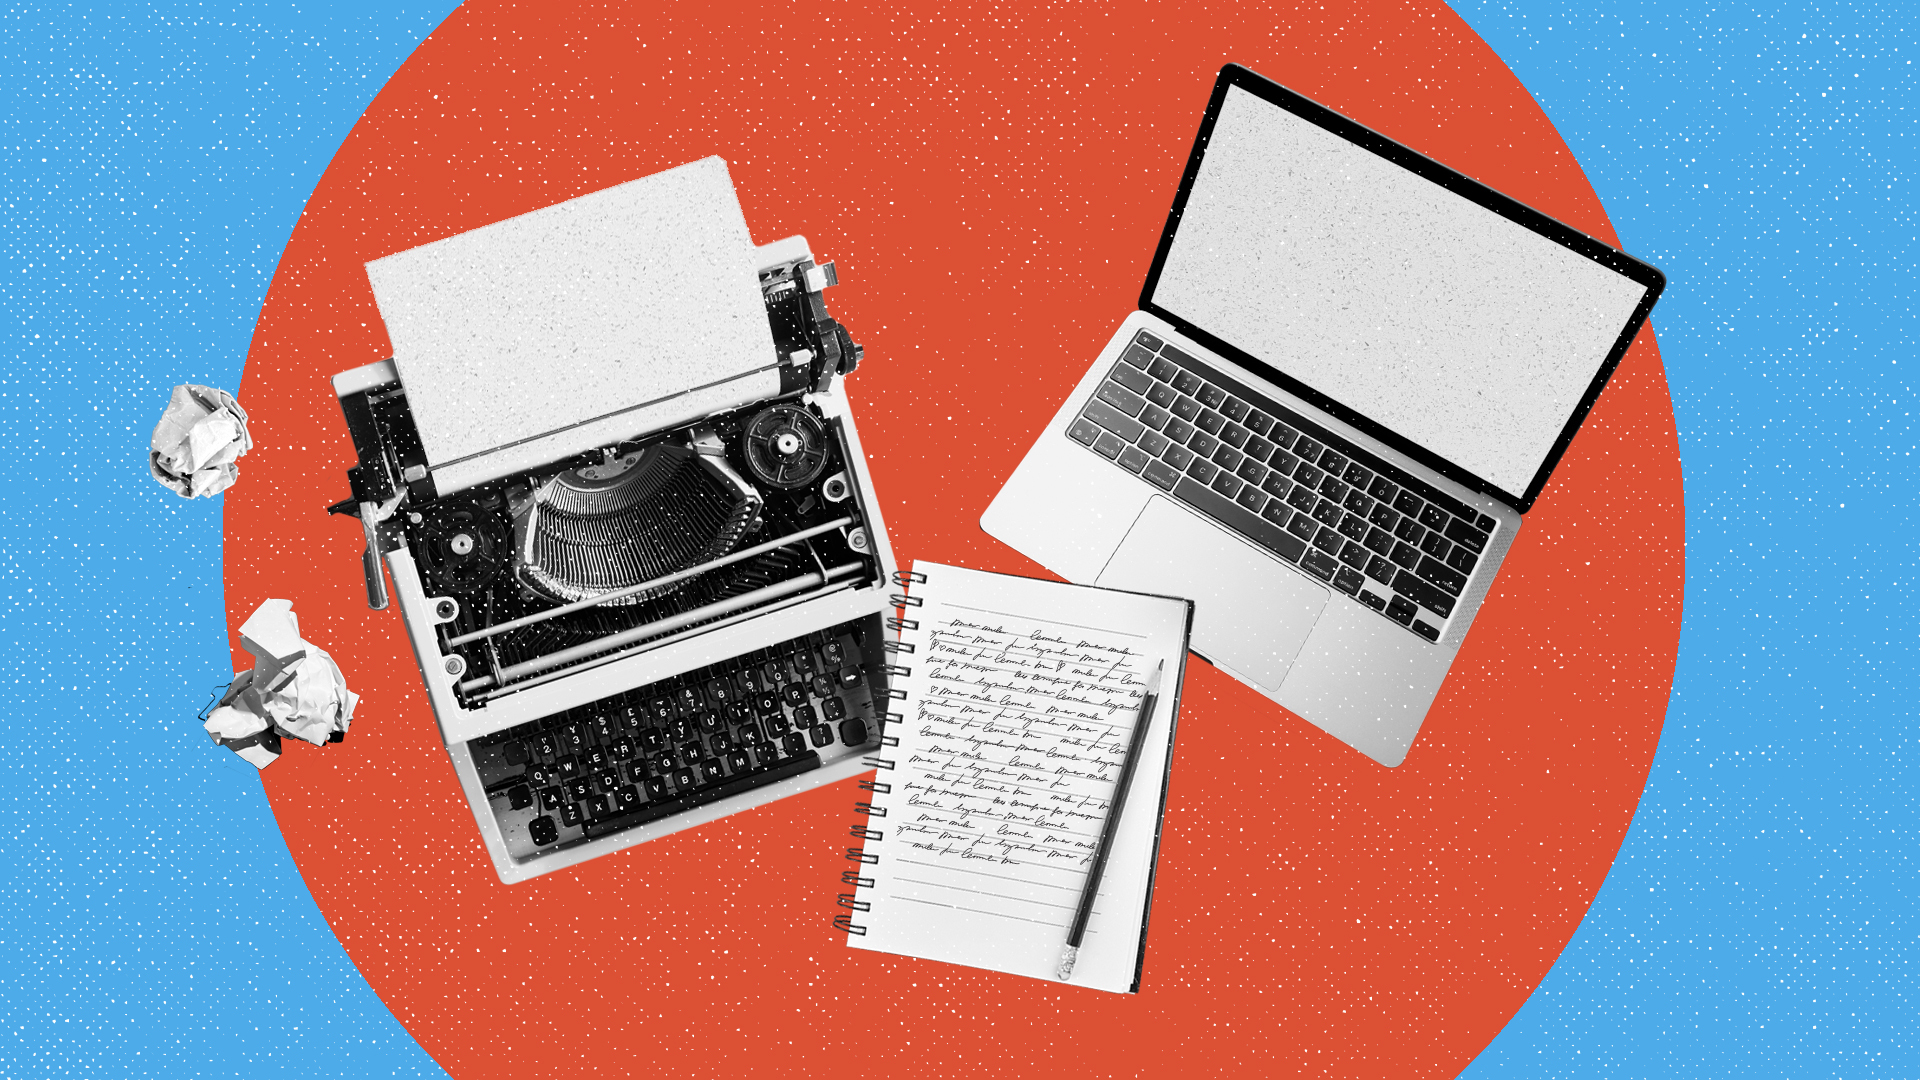 An illustration of a typewriter, notebook, and laptop